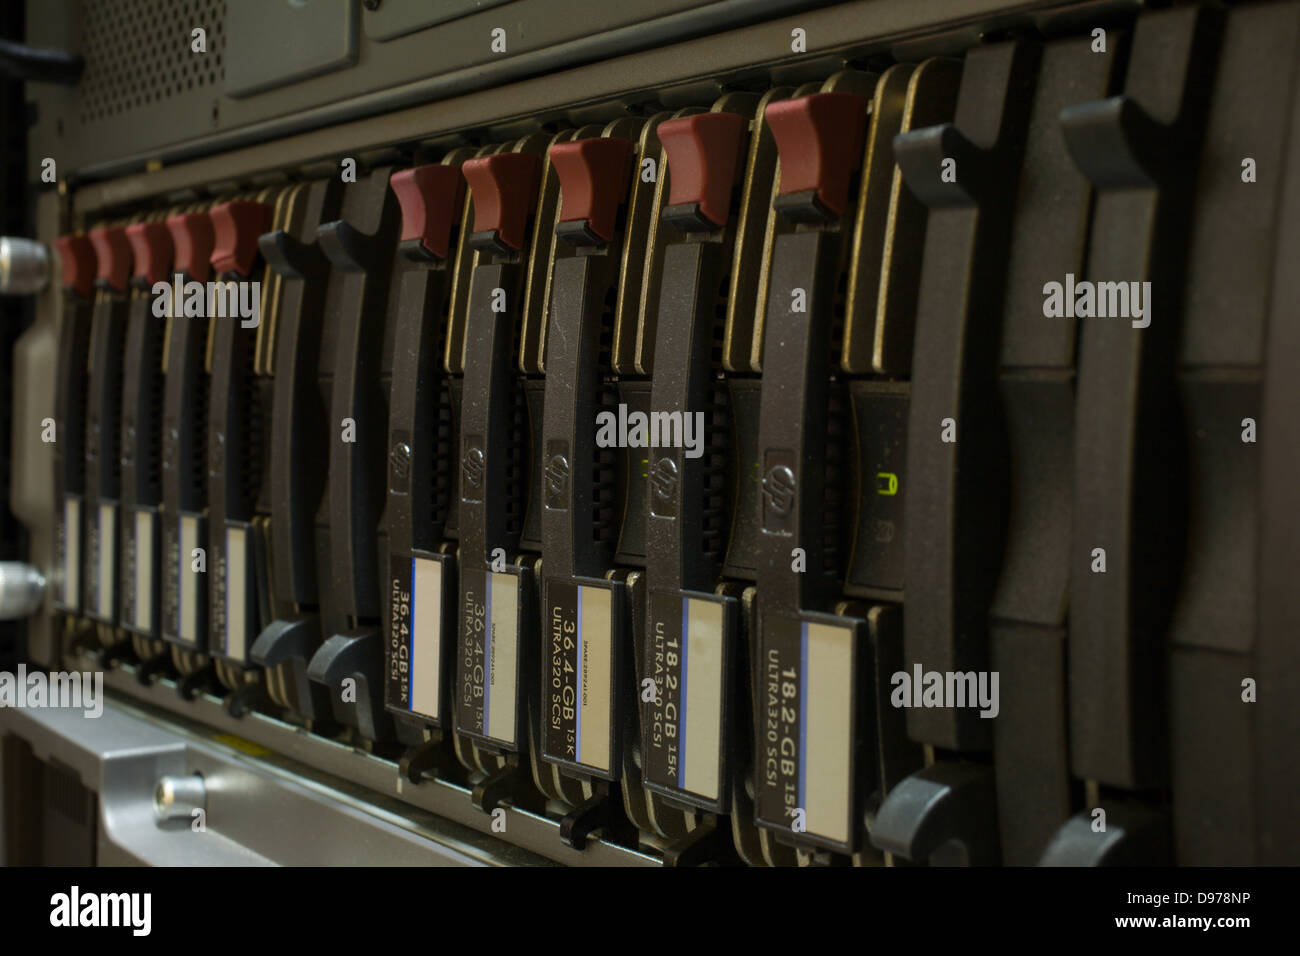 A row of HP SCSI320 drives Stock Photo